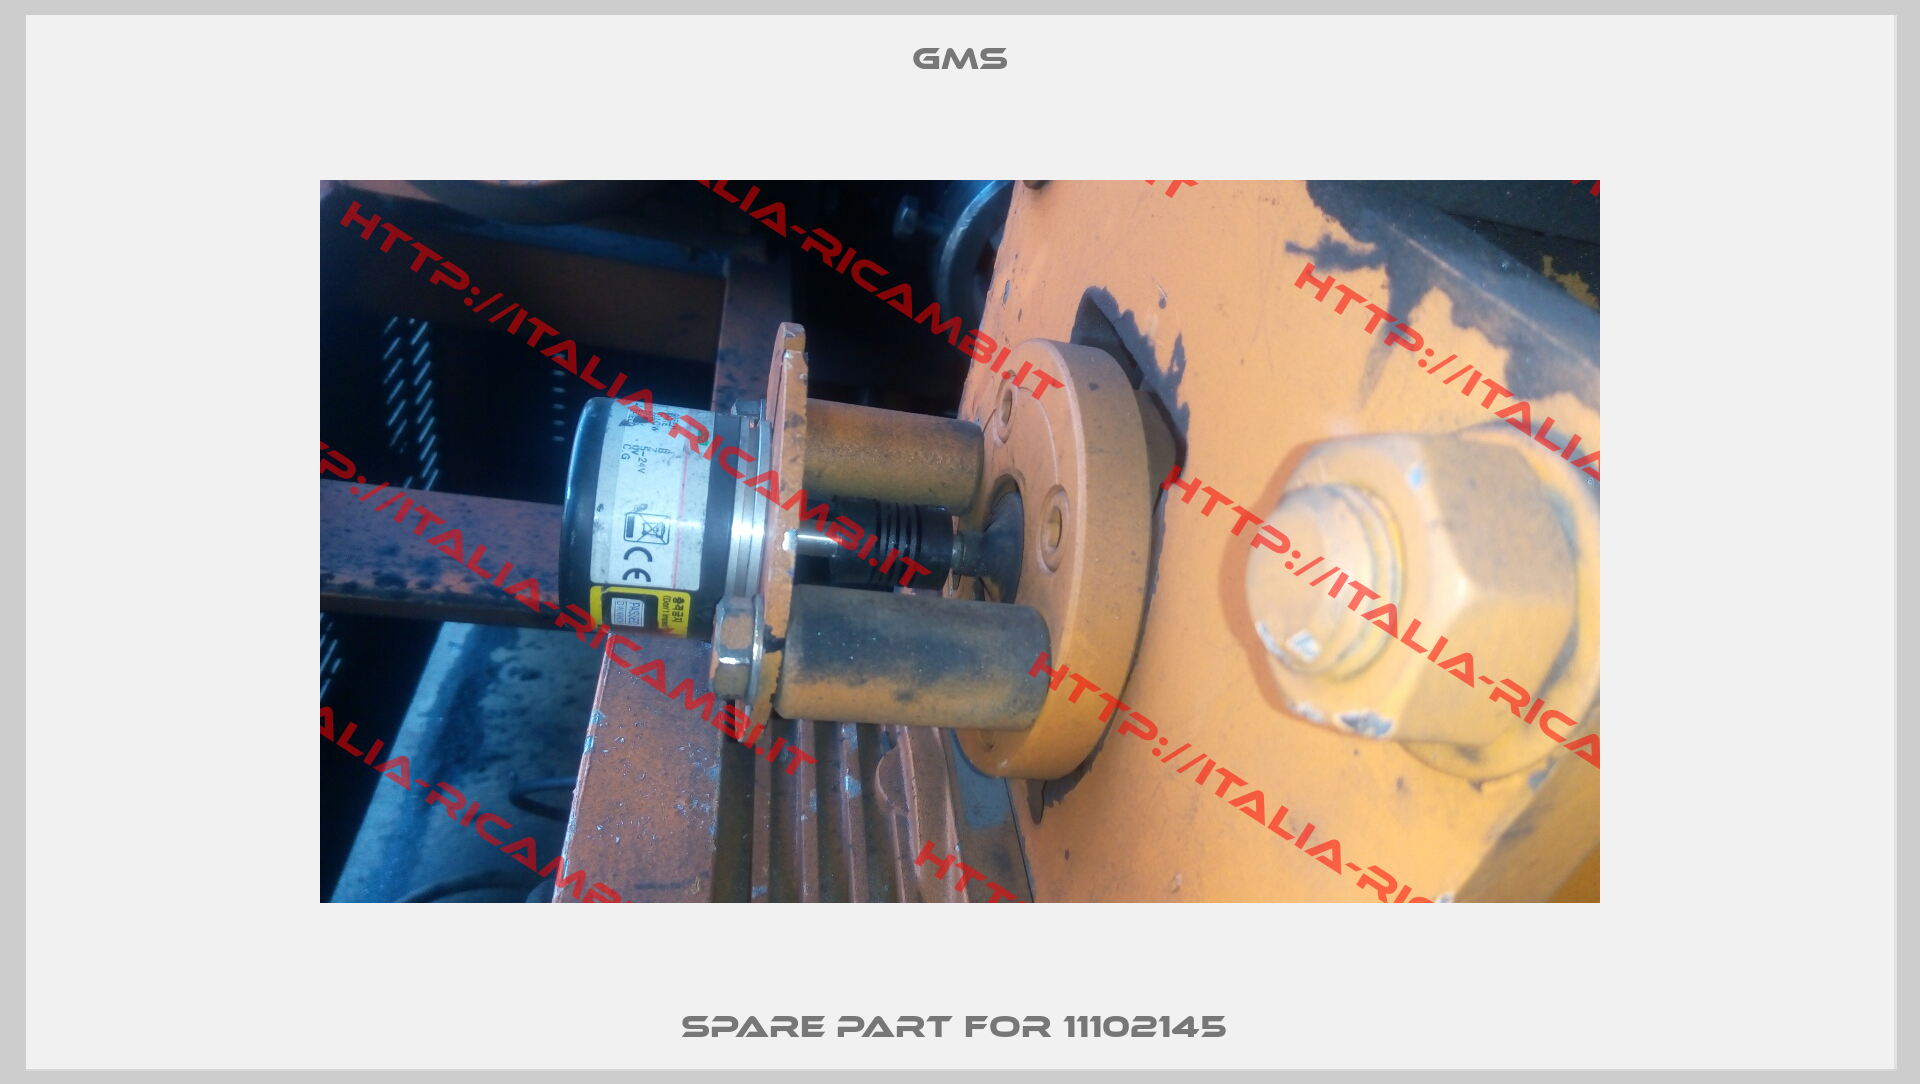 spare part for 11102145 -1